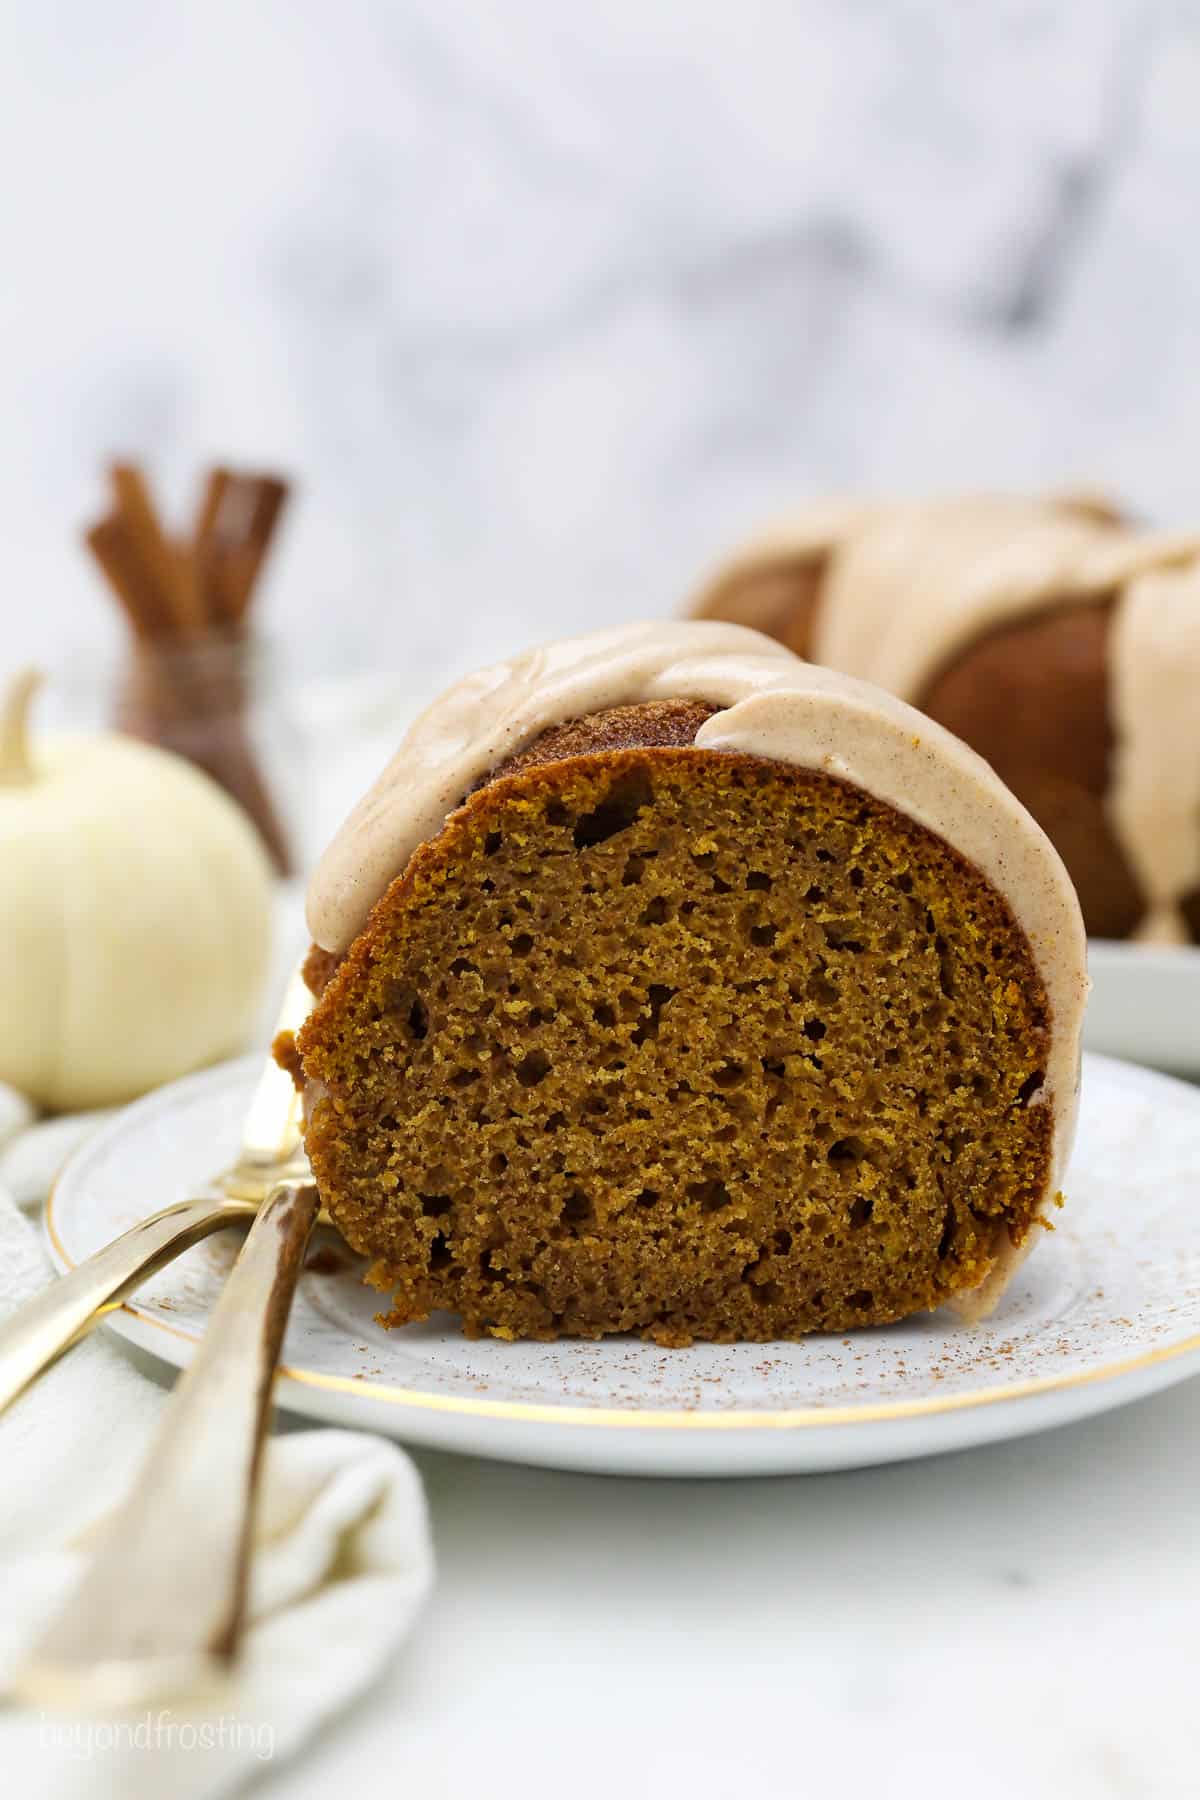 A slice of moist pumpkin cake with a glaze, and two gold forks hanging off the white plate